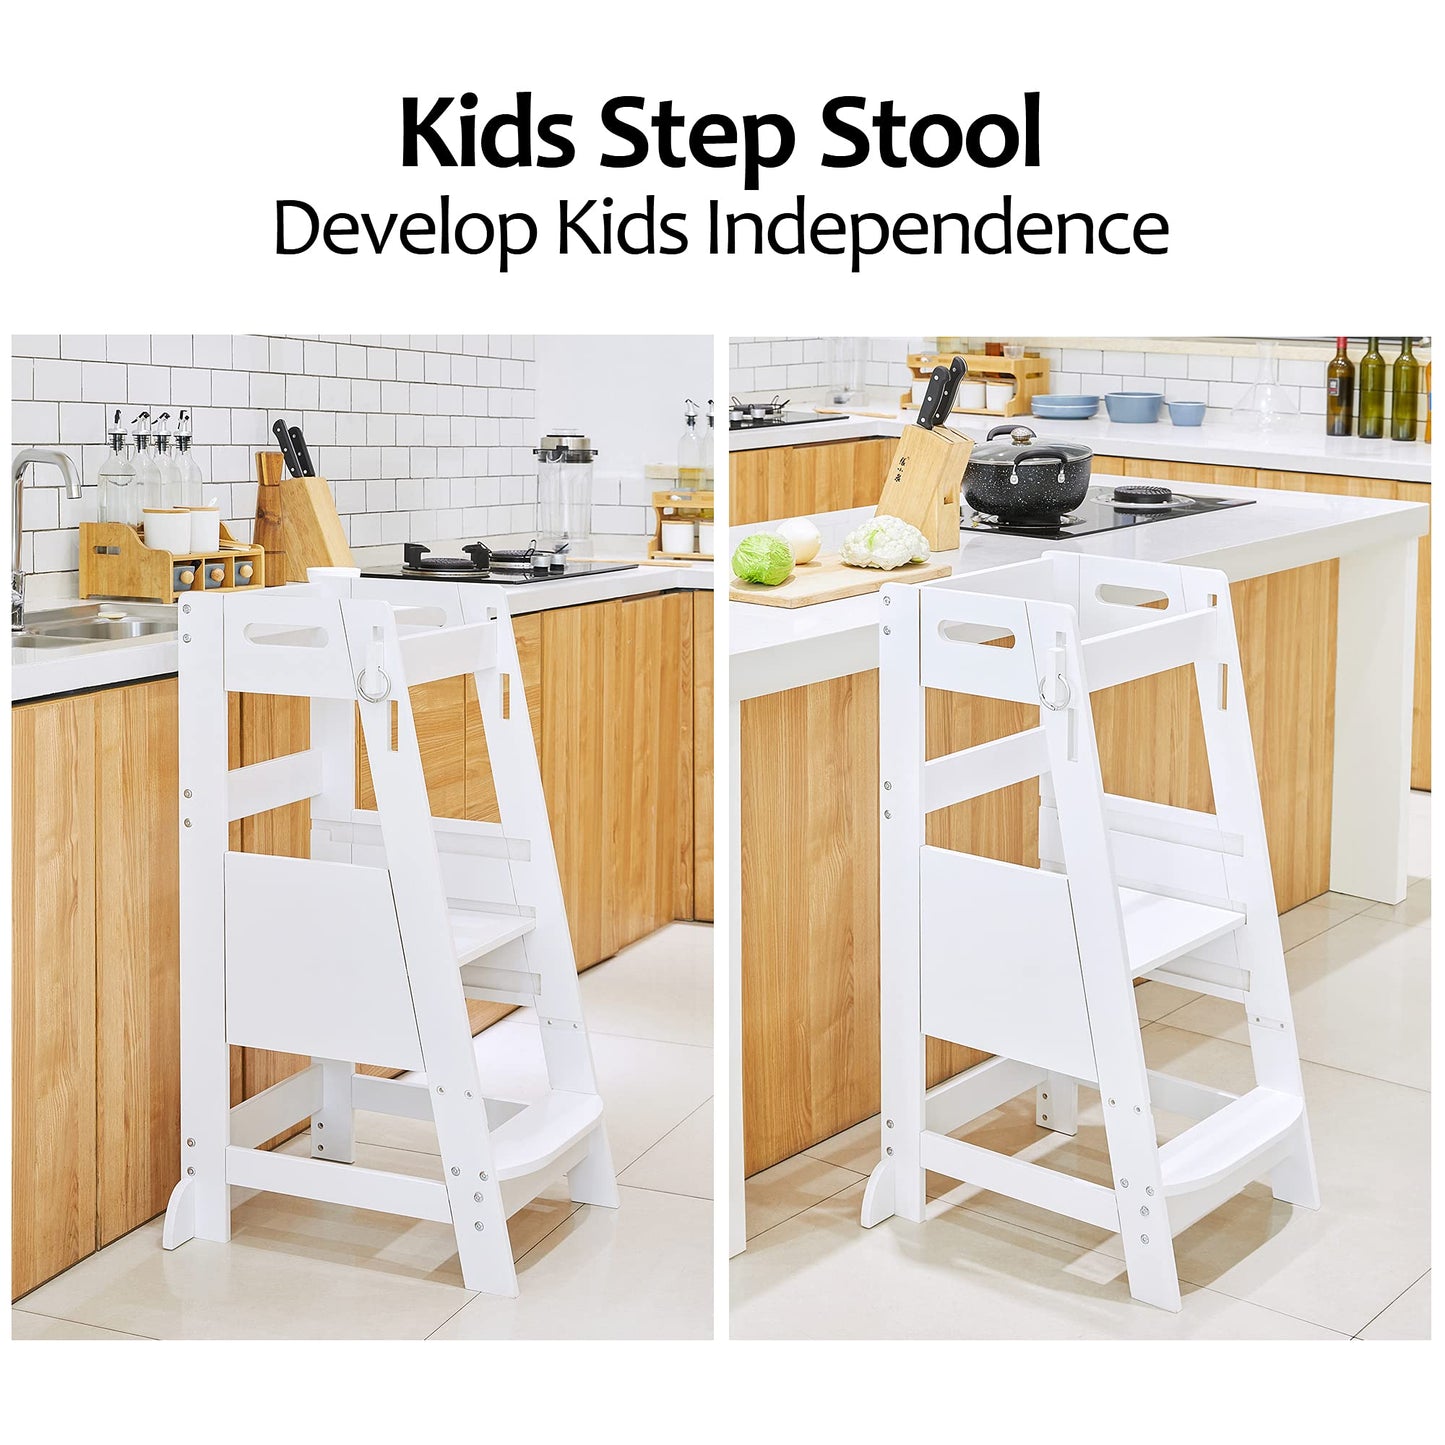 TOETOL Bamboo Toddler Step Stool Grey Learning Standing Helper Tower for Toddlers Kitchen Stools Counter 3 Height Adjustable Helper with Non-Slip Mat